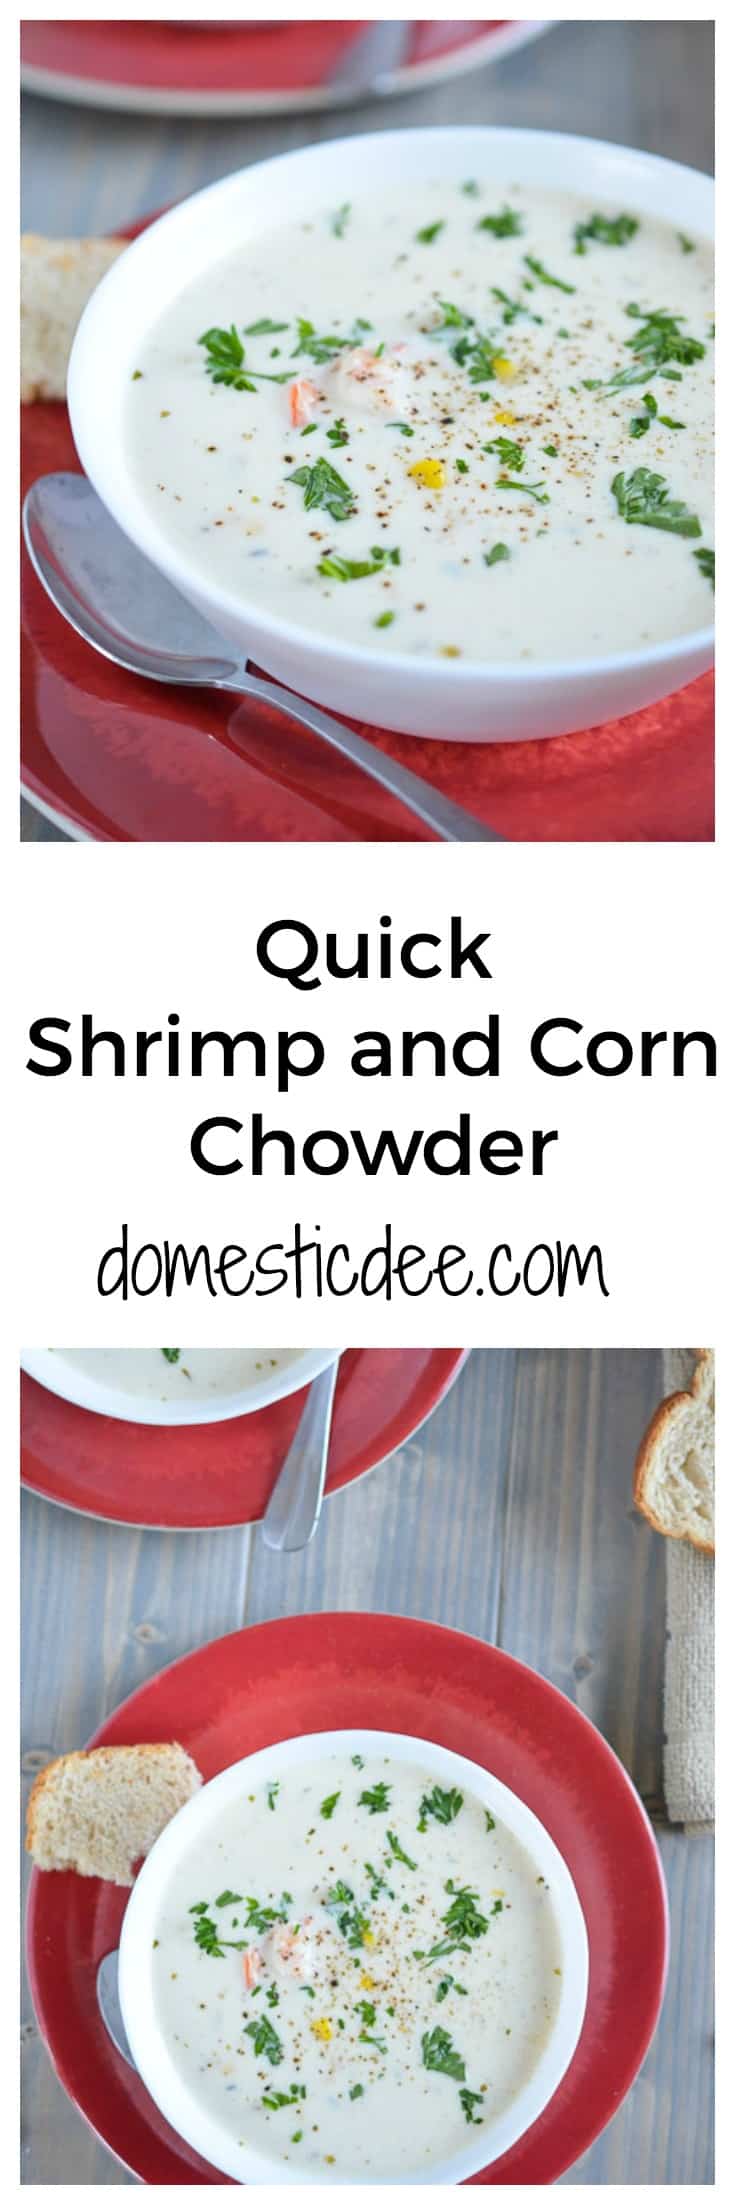 Quick Shrimp & Corn Chowder-This creamy shrimp and corn chowder dish will become your favorite meal of all time. It’s so so easy to make and simply delicious. I guarantee this will be added to your family’s weekly meal plan.